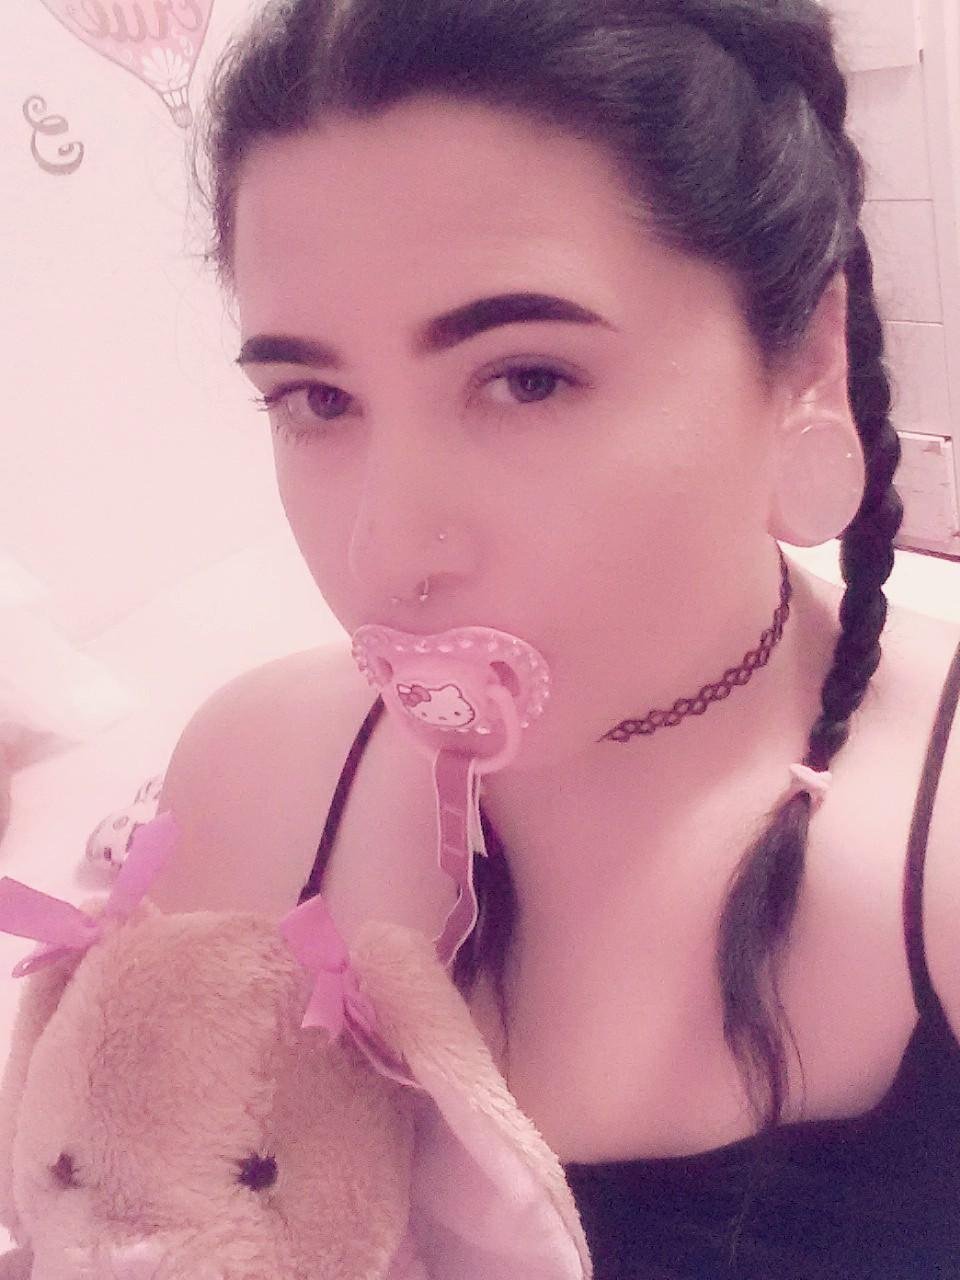 Feeling cute with my paci and bunny :)